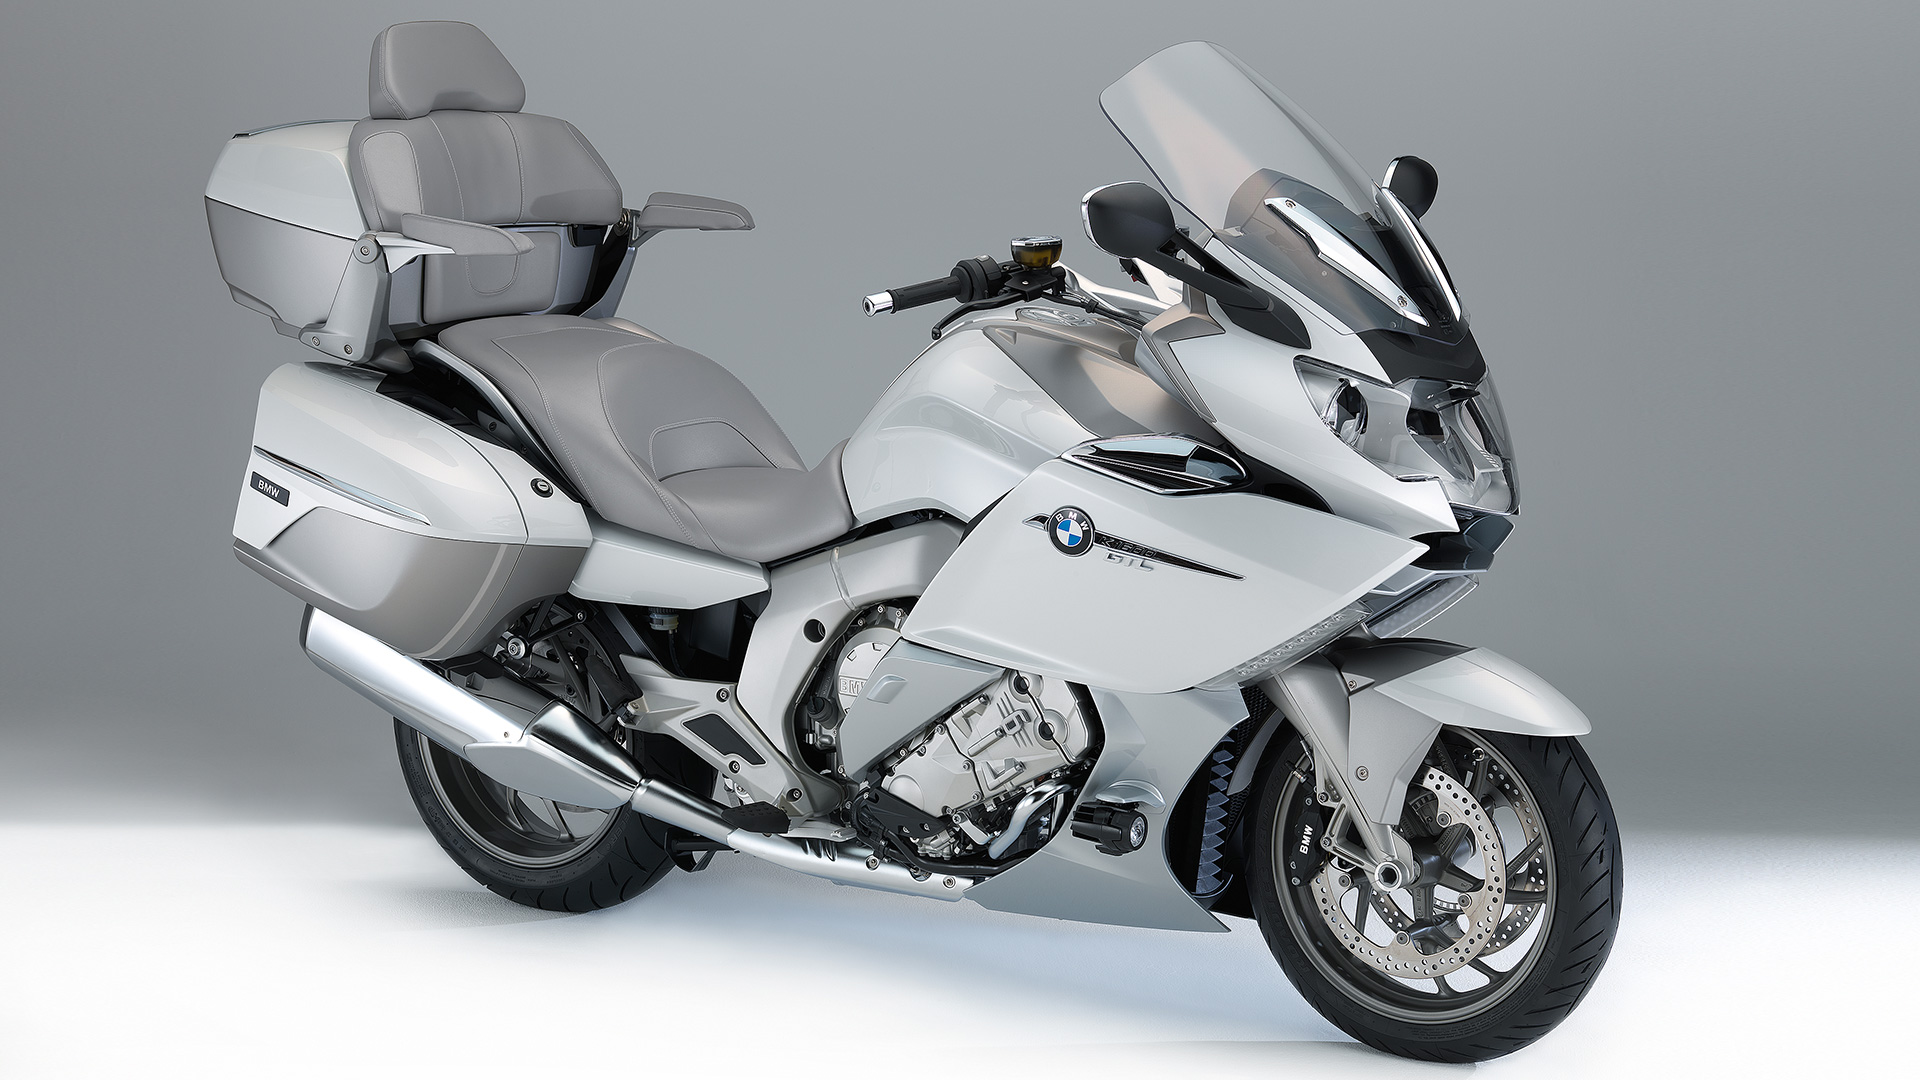 Bmw K 1600 Gtl 2017 Price Mileage Reviews Specification Gallery Overdrive